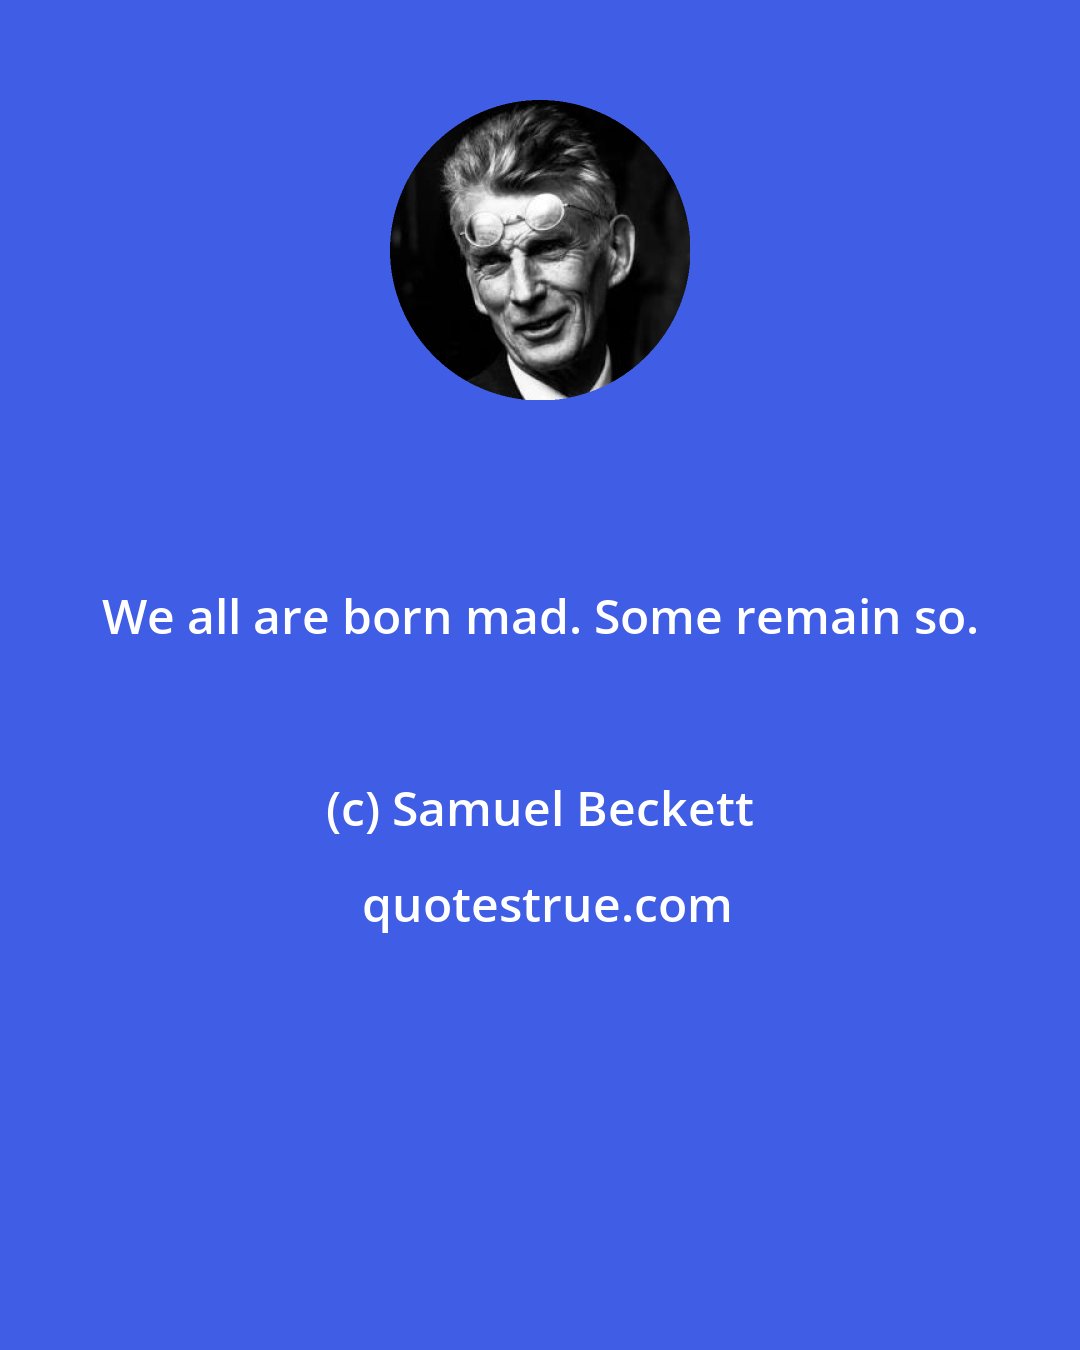 Samuel Beckett: We all are born mad. Some remain so.